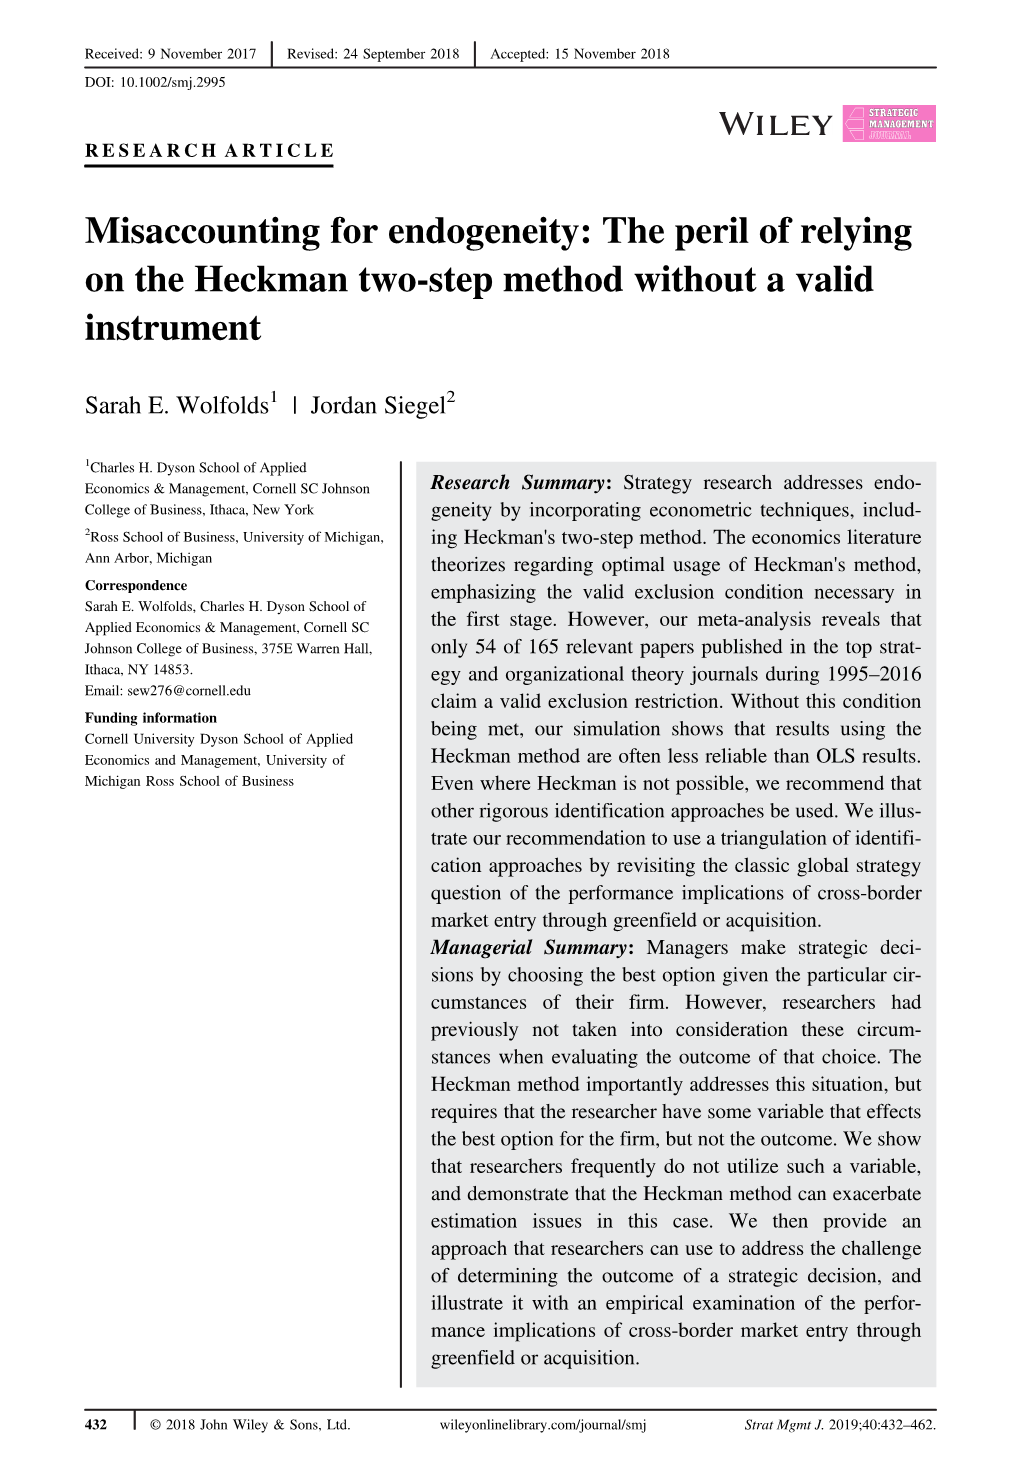 Misaccounting for Endogeneity: the Peril of Relying on the Heckman Two-Step Method Without a Valid Instrument